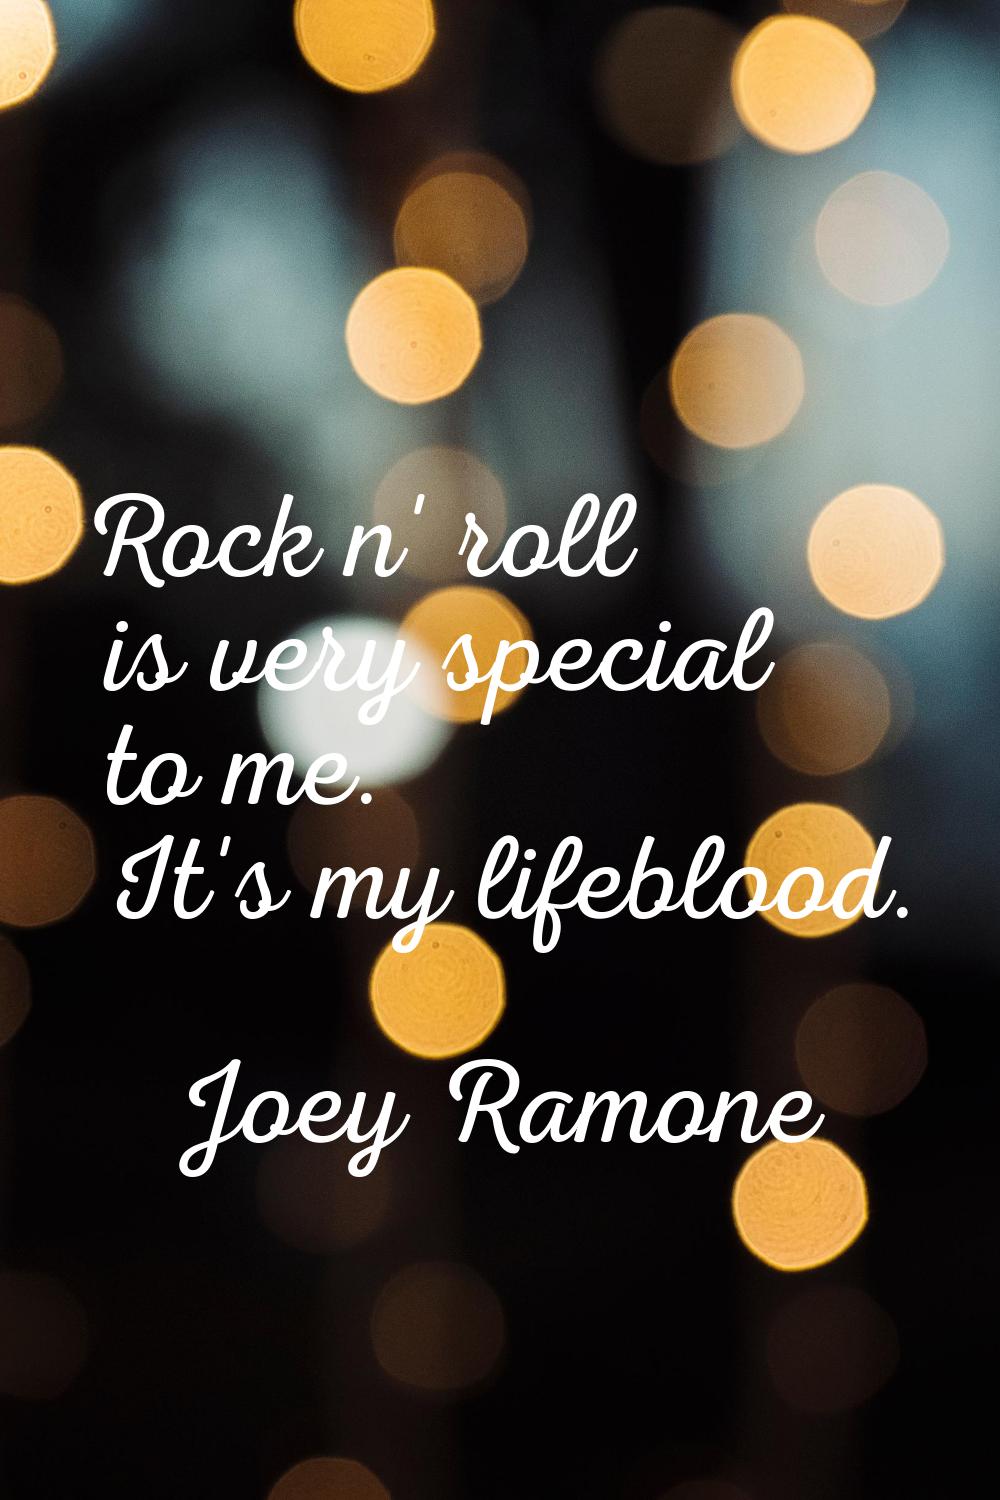 Rock n' roll is very special to me. It's my lifeblood.